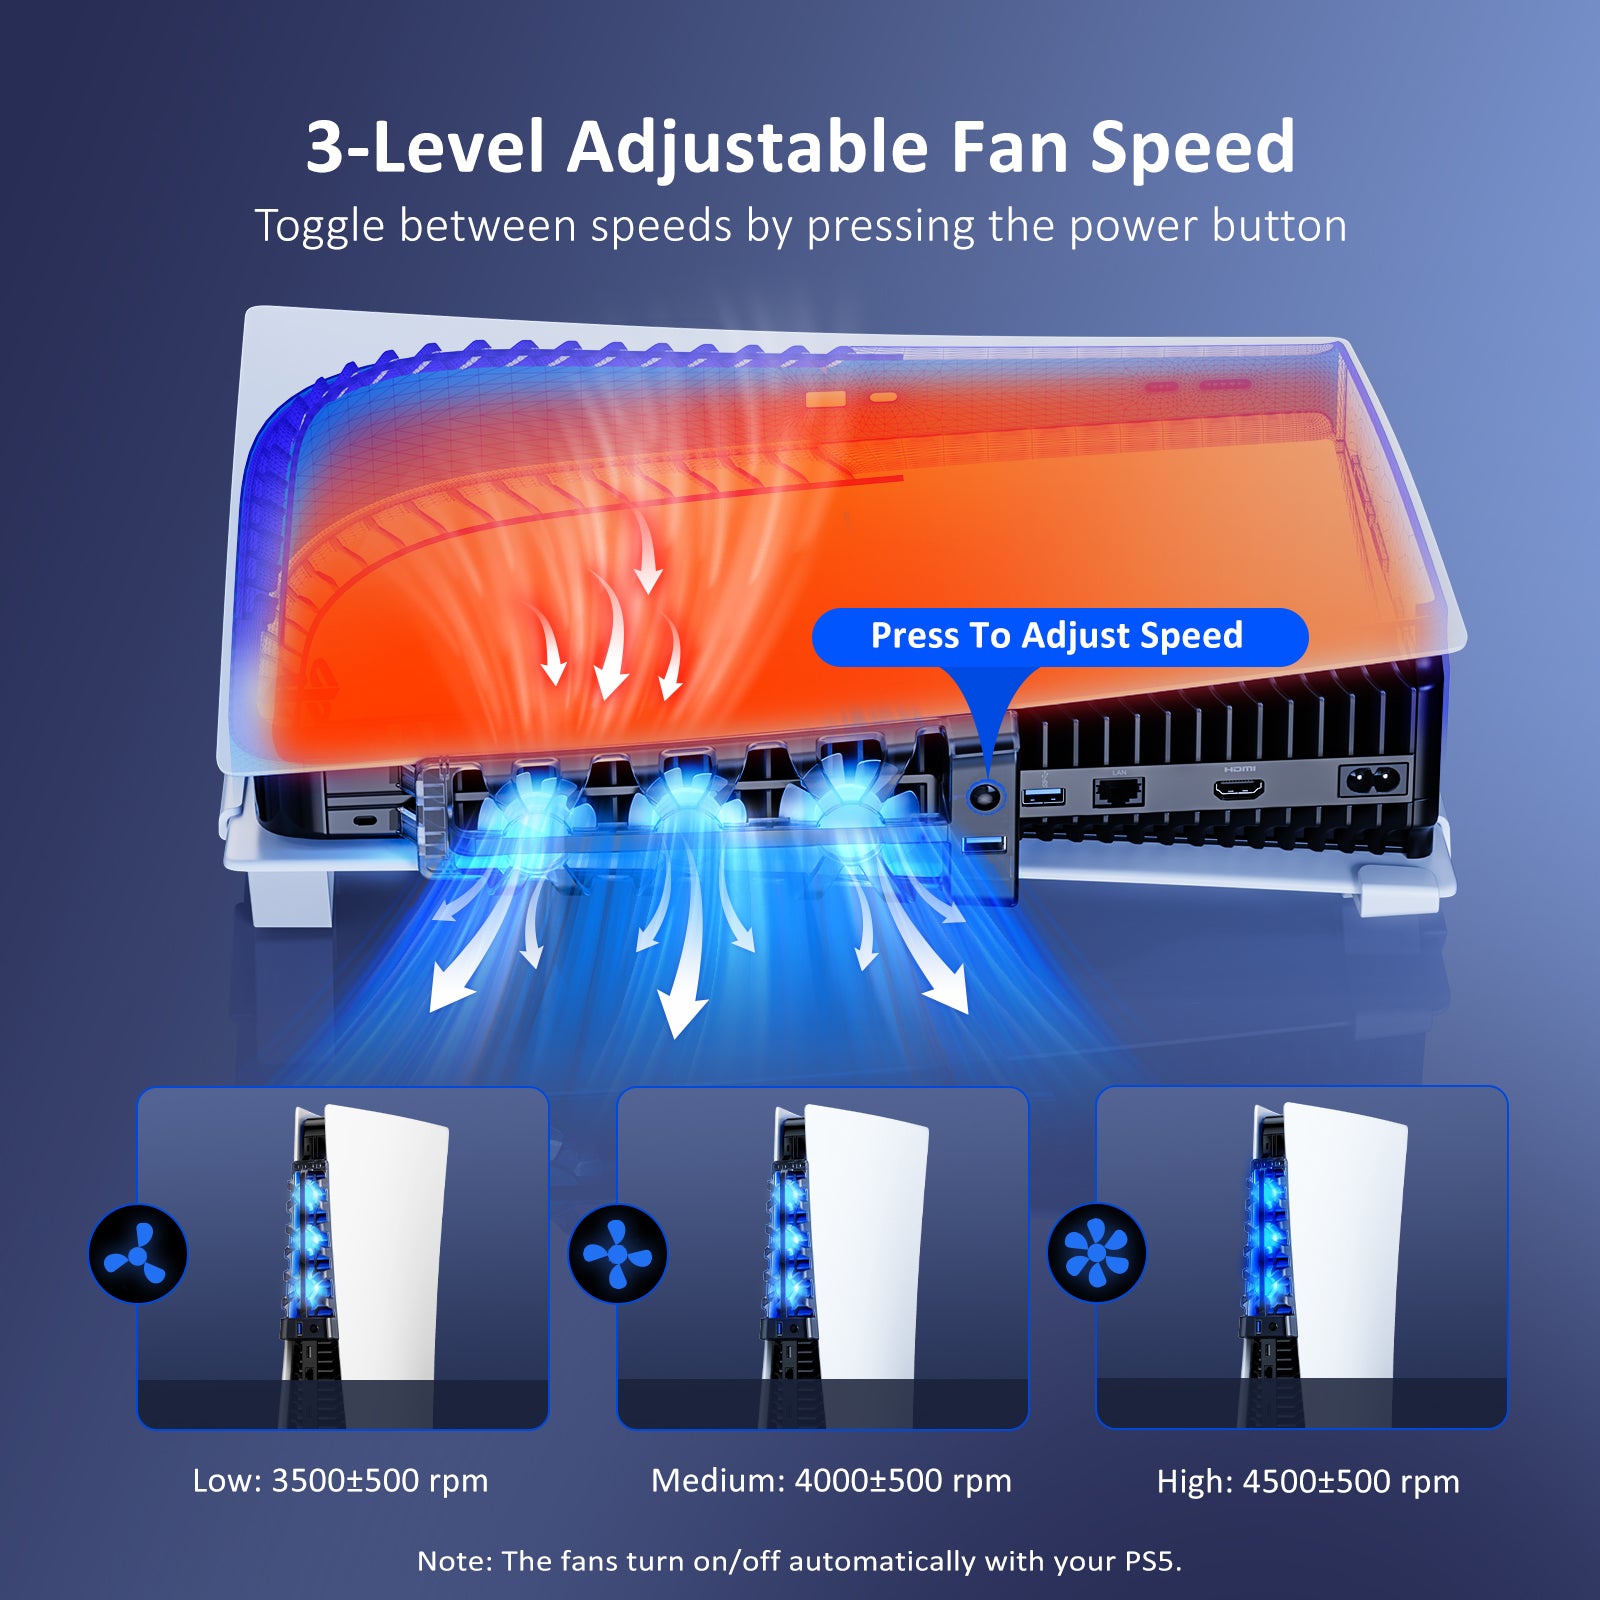 Toggle between high, medium, and low speeds of fans by pressing the power button.